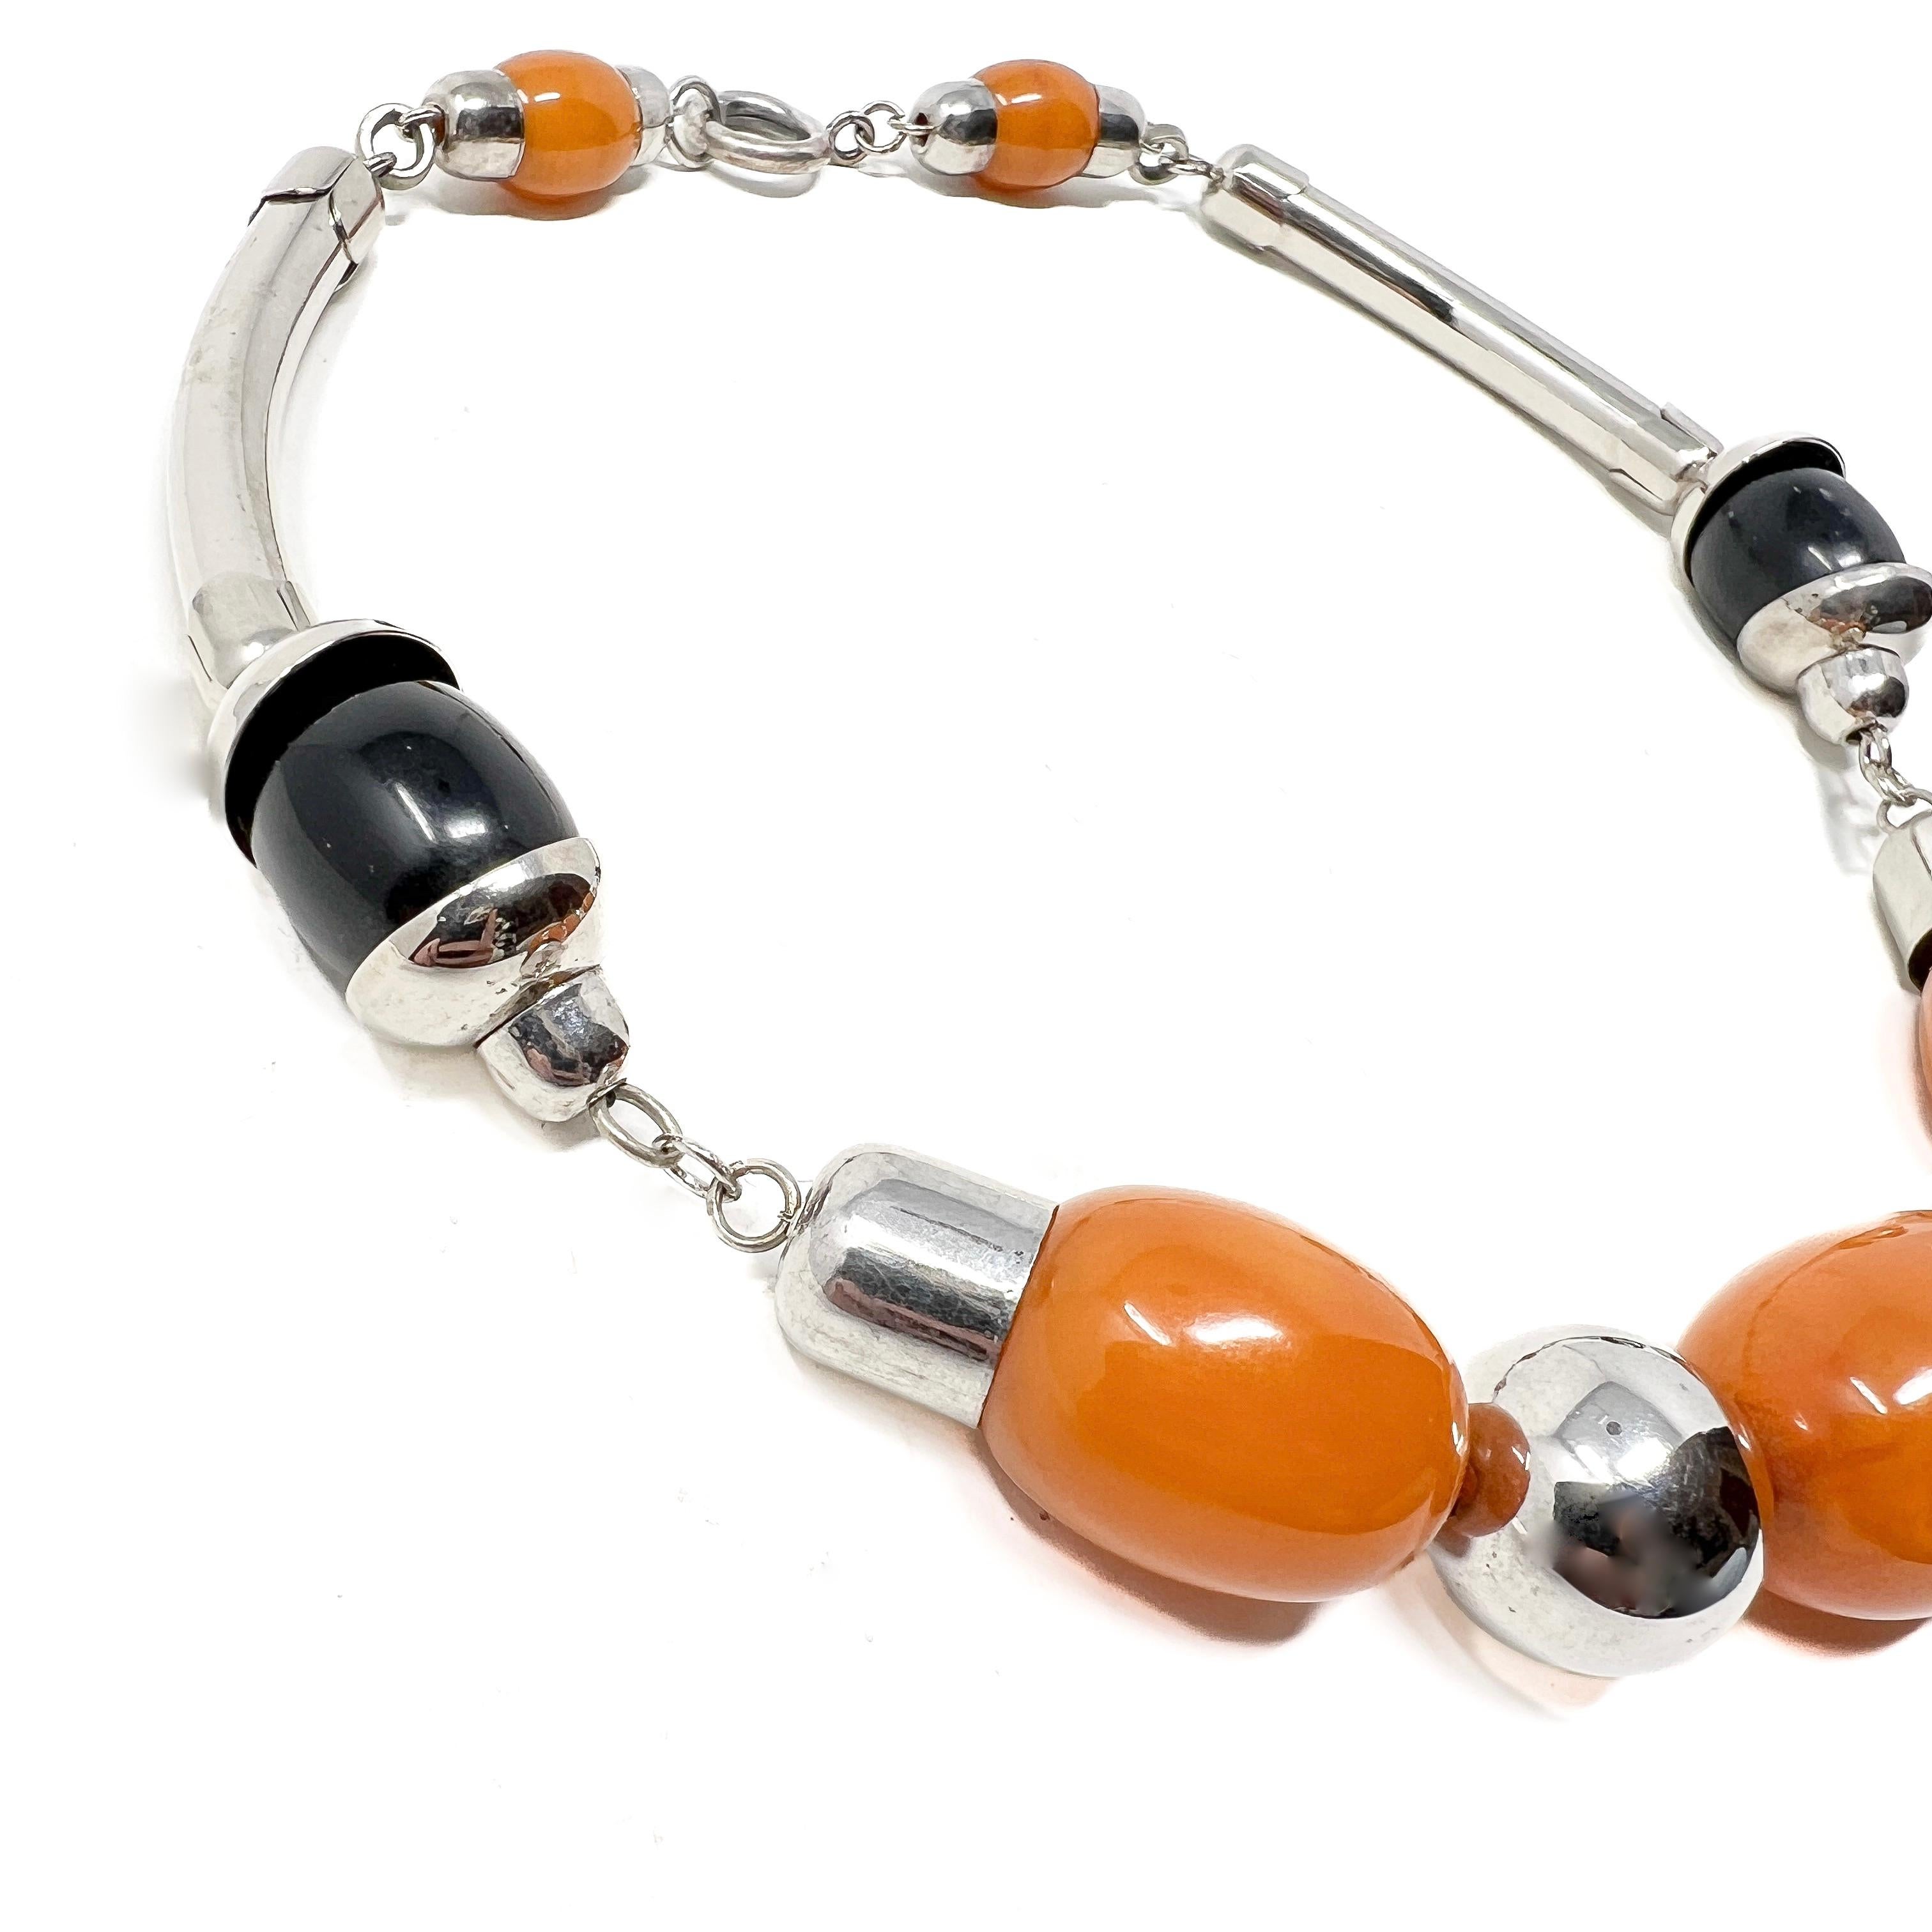 Women's Jakob Bengel 1930s Chrome, Bakelite and Galalith Vintage Necklace For Sale